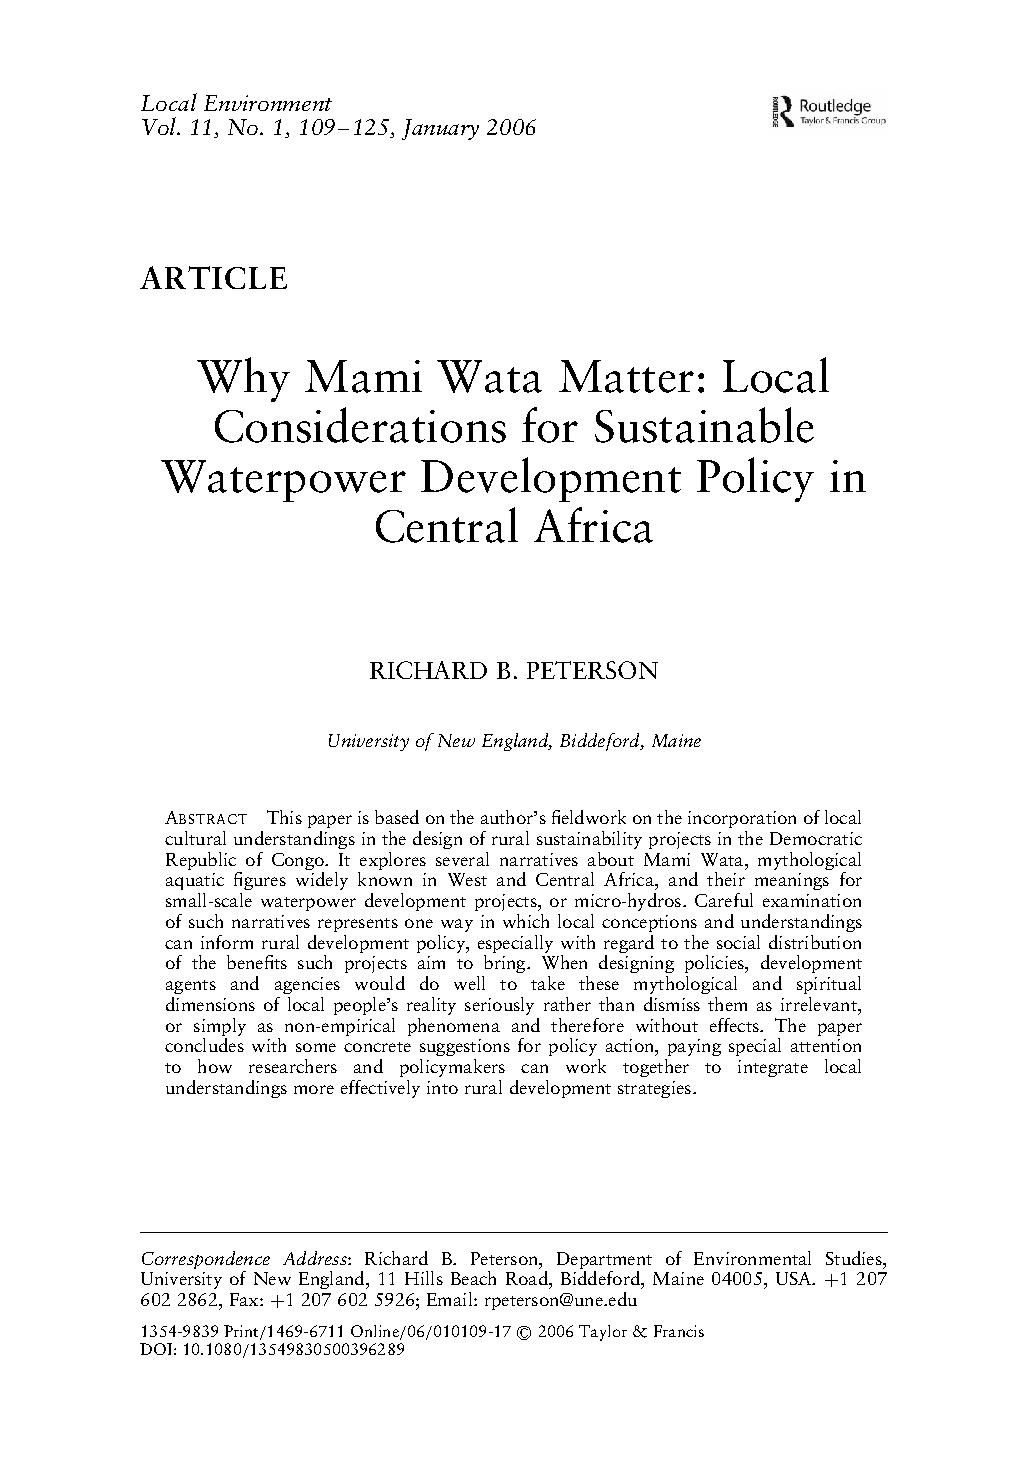 Why Mami Wata Matter: Local Considerations for Sustainable Waterpower Development Policy in Central Africa